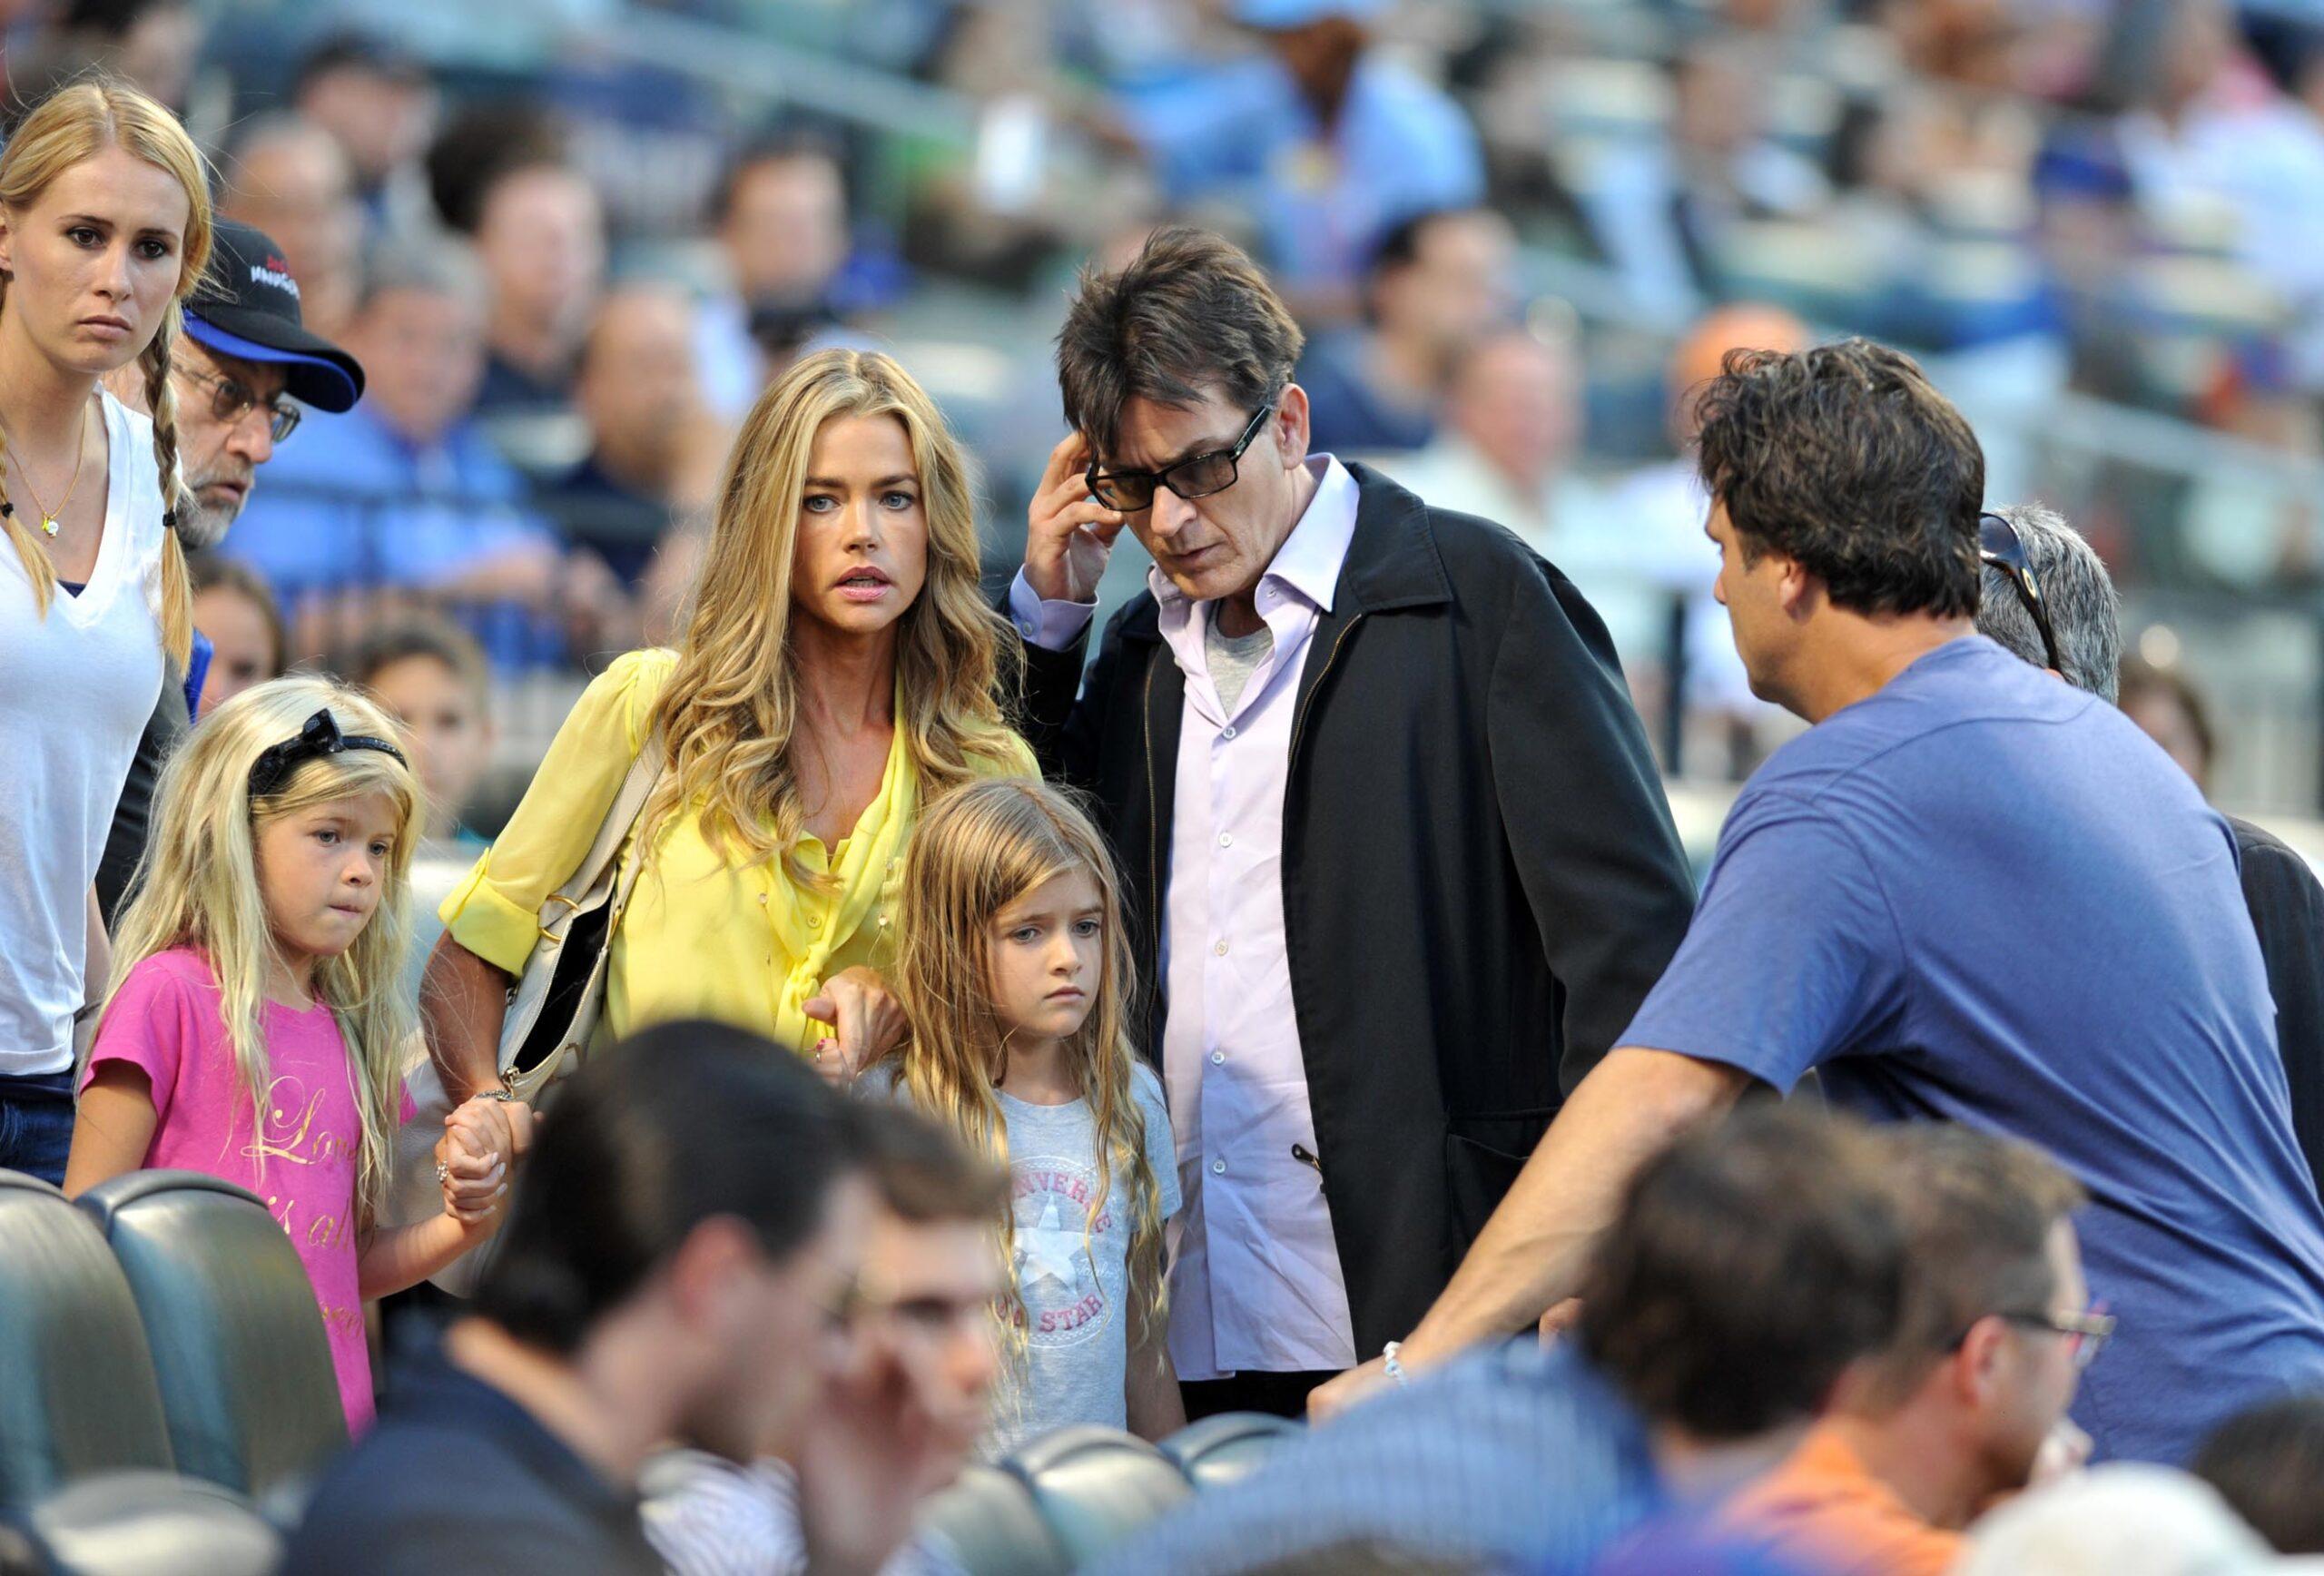 Charlie Sheen Scores BIG In Court, Owes Denise Richards Zero In Child Support